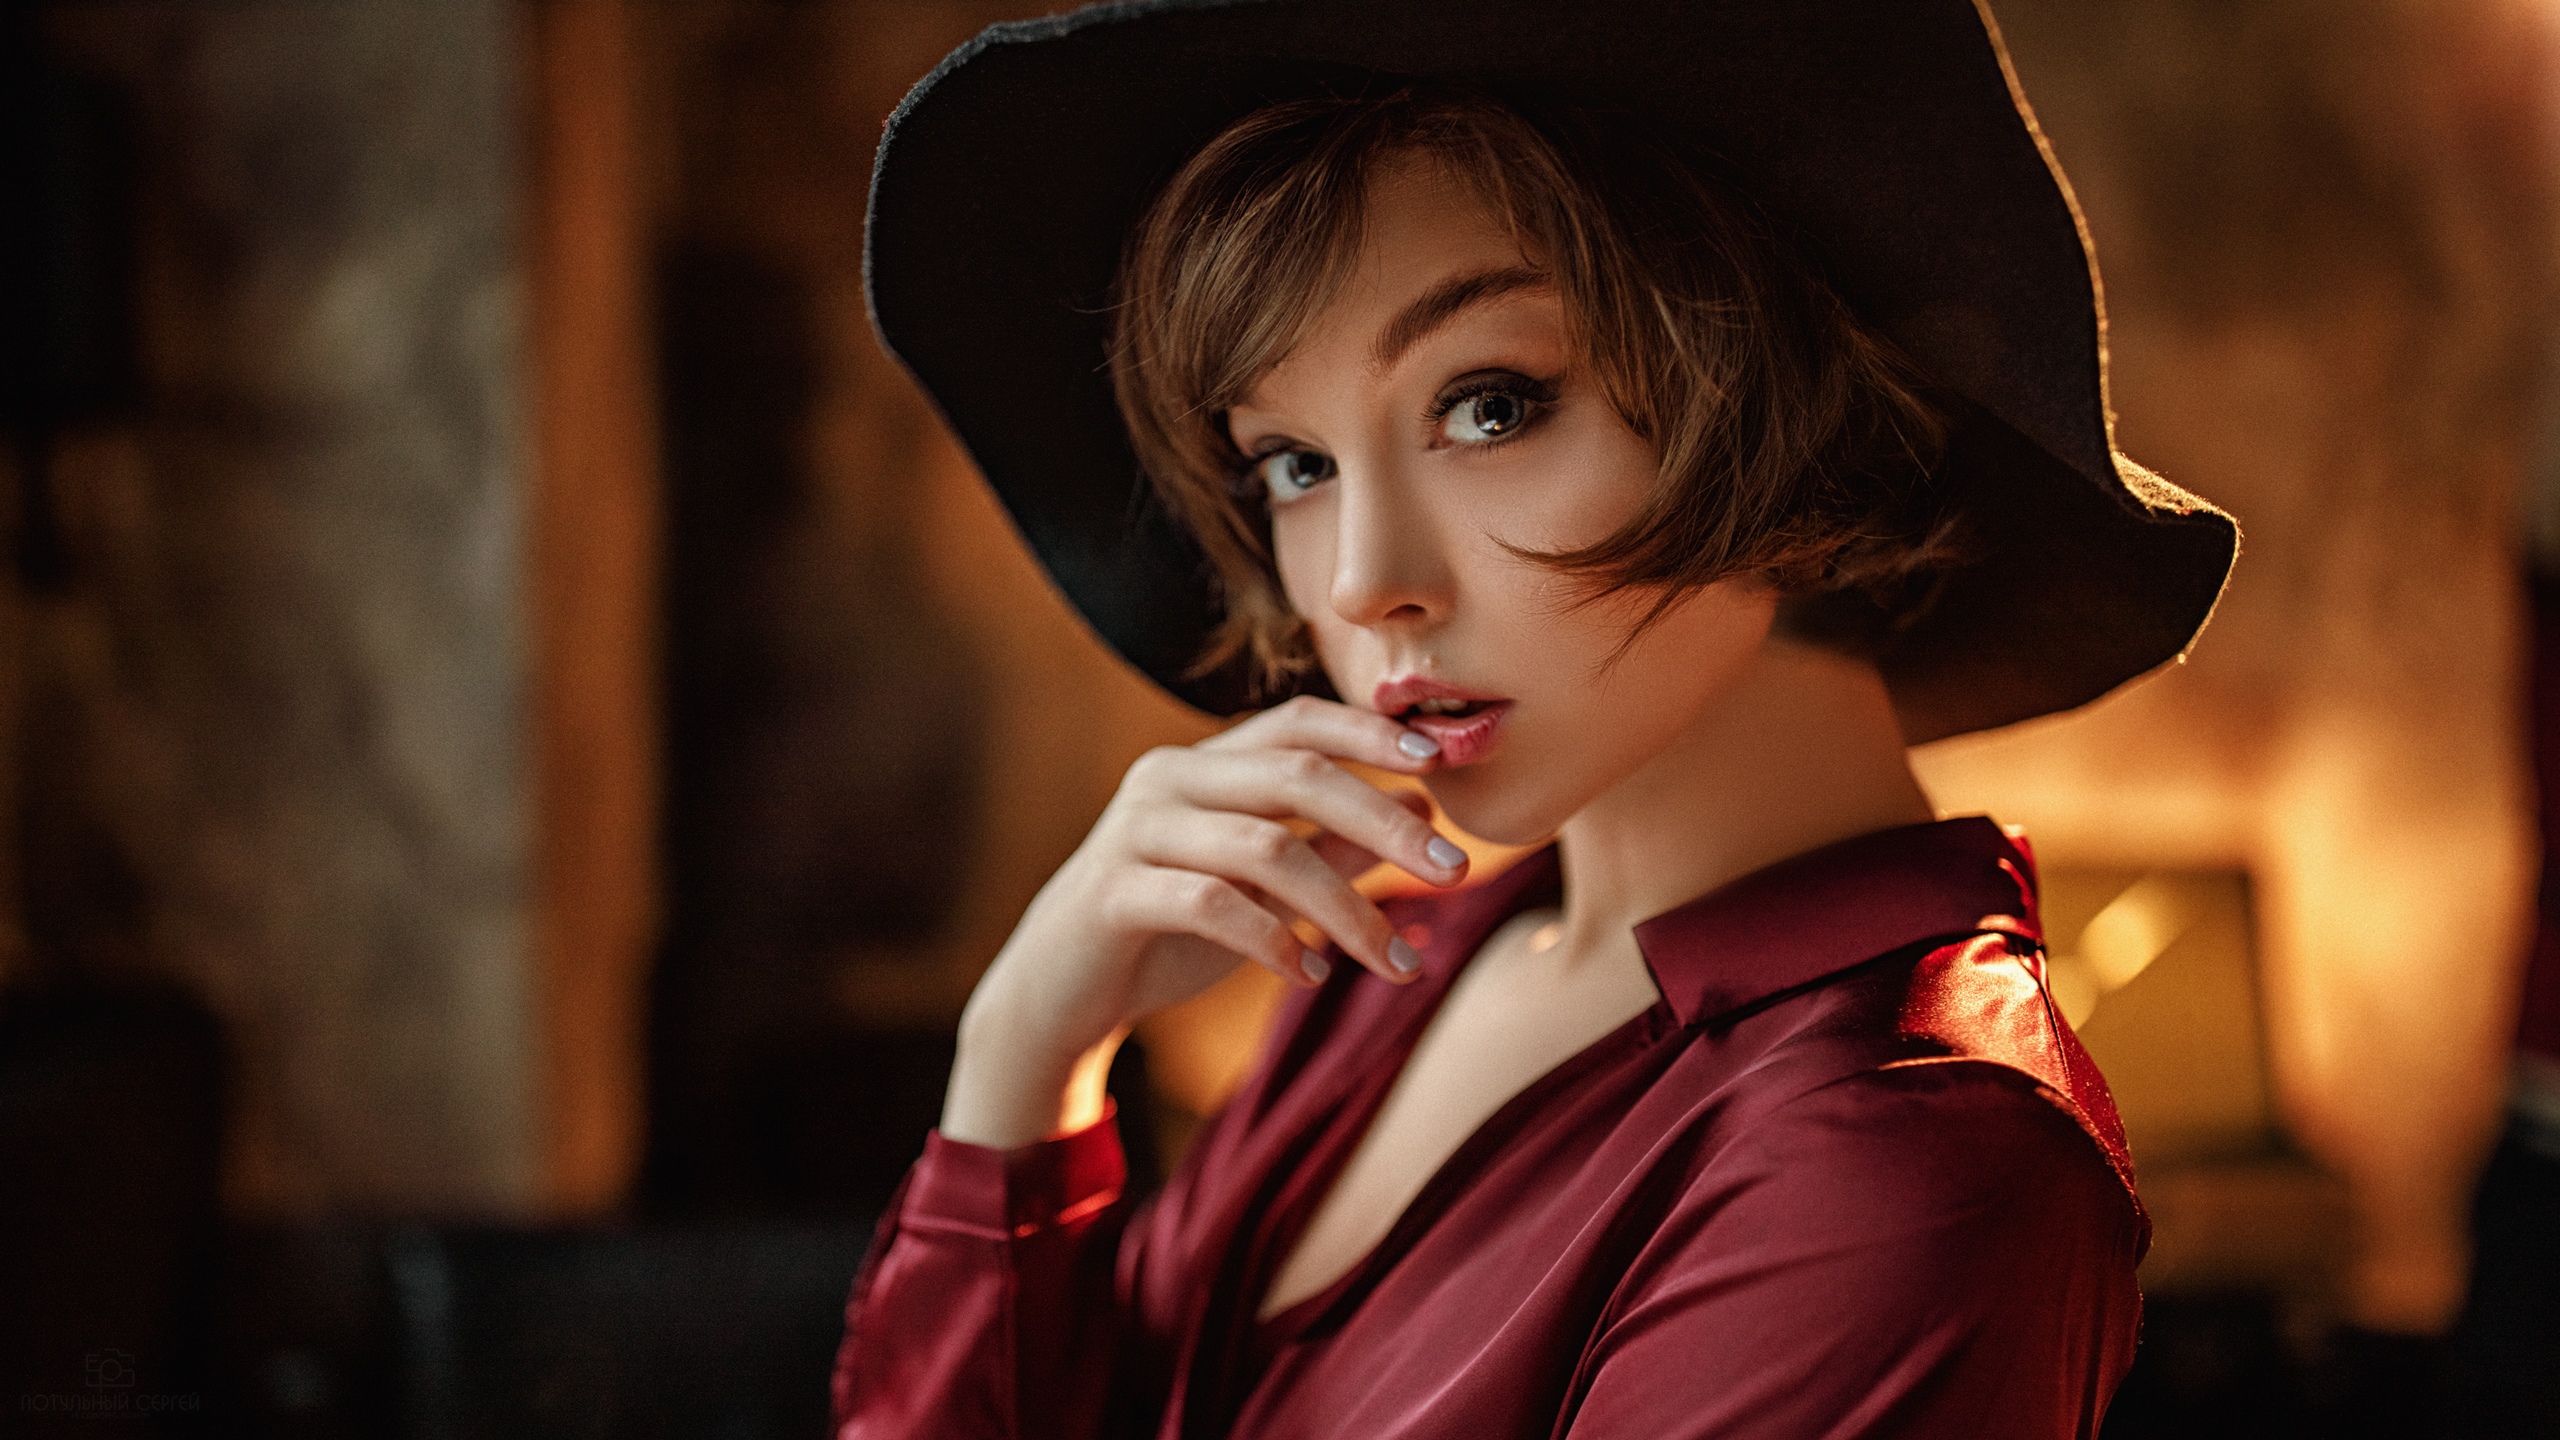 People 2560x1440 Olya Pushkina women model brunette short hair looking at viewer portrait indoors finger on lips sensual gaze bokeh white nails painted nails women with hats hat dress red clothing women indoors